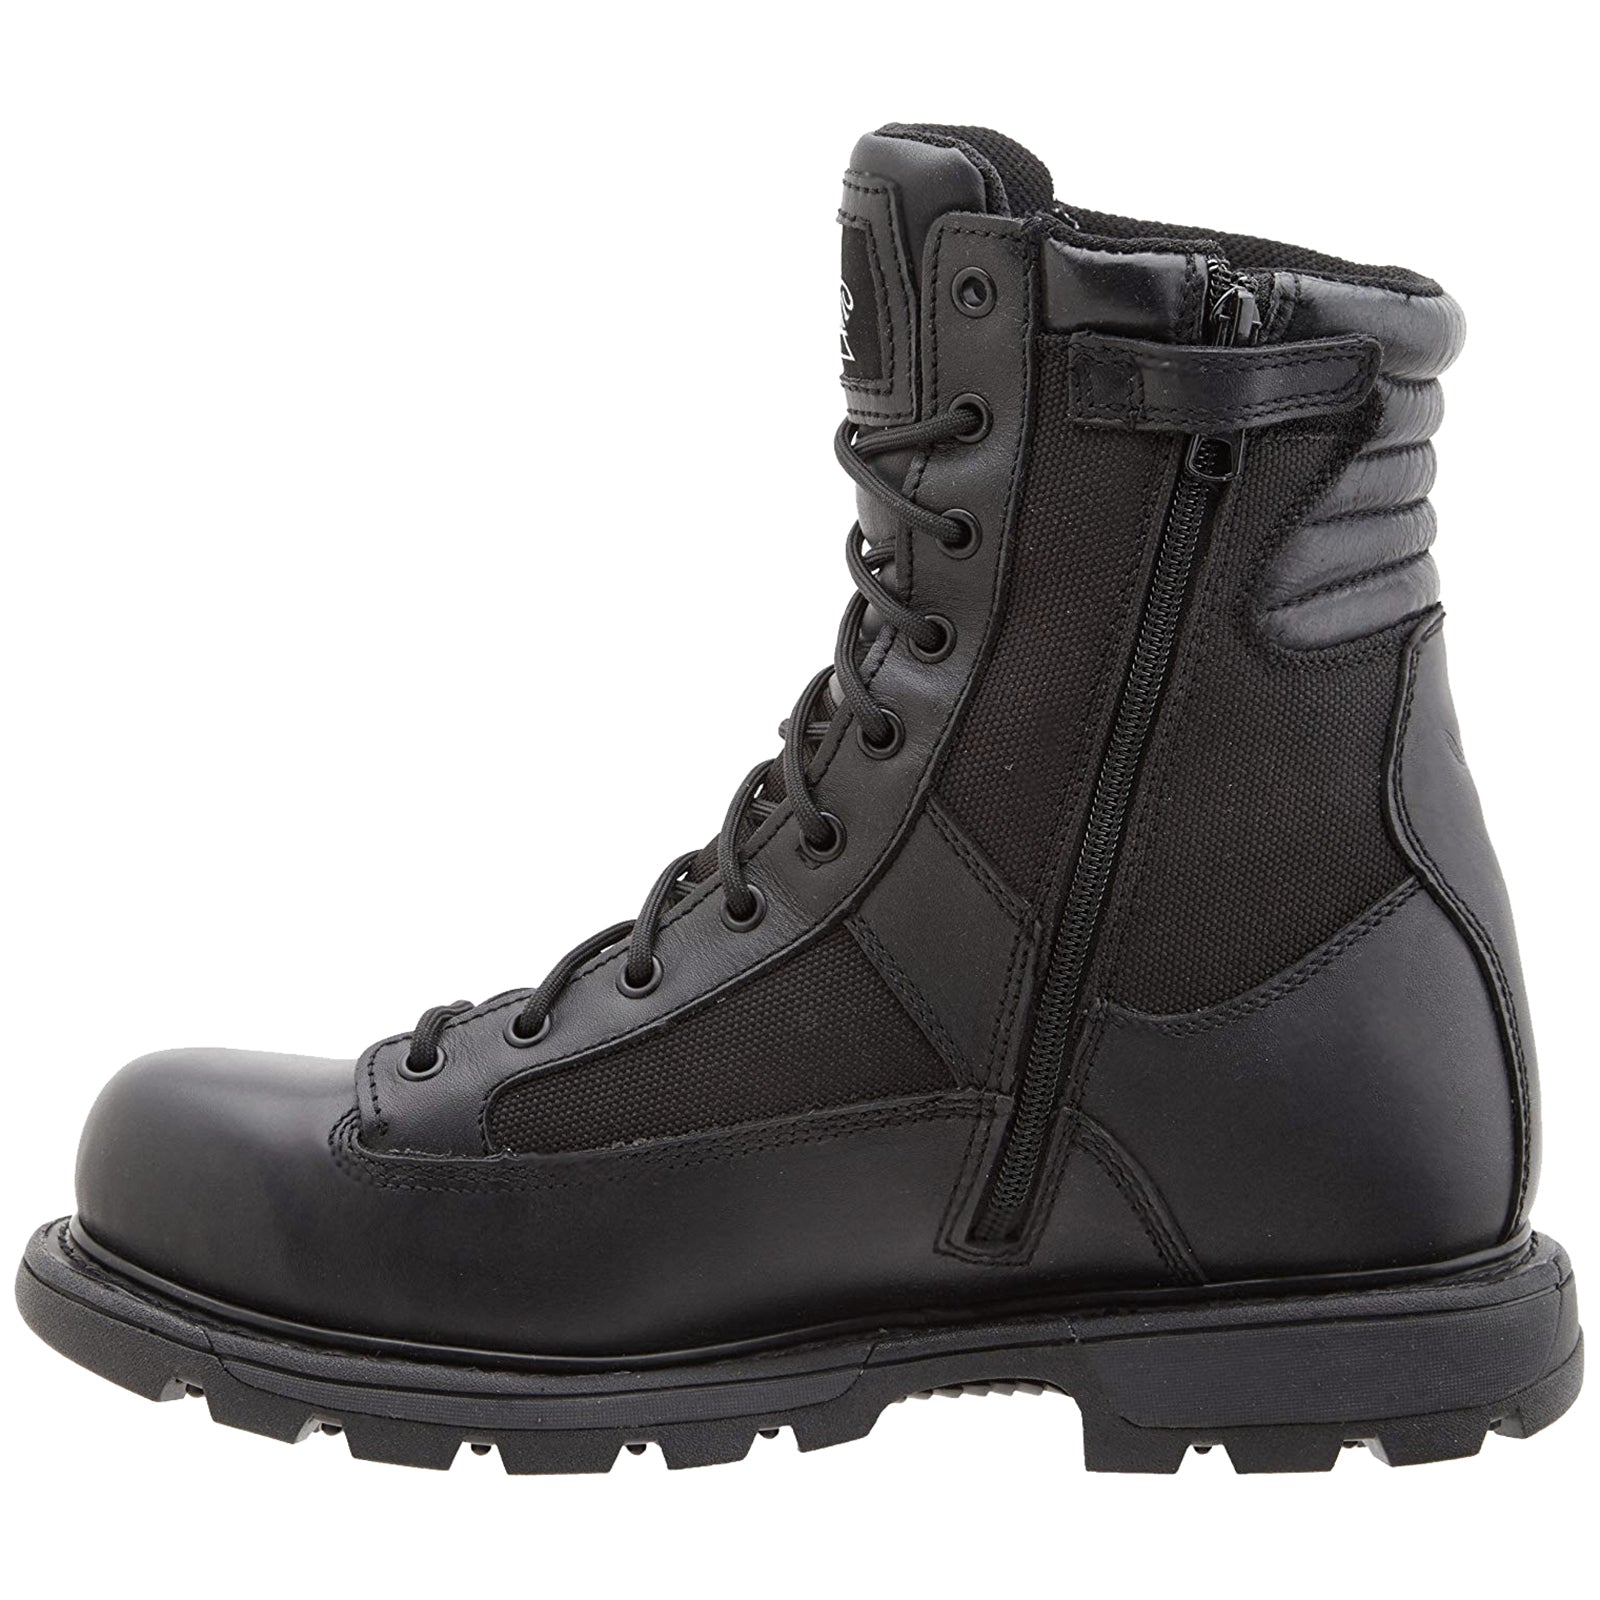 Thorogood Mens Boots 8 Inch Side Zip Trooper Leather - UK 10